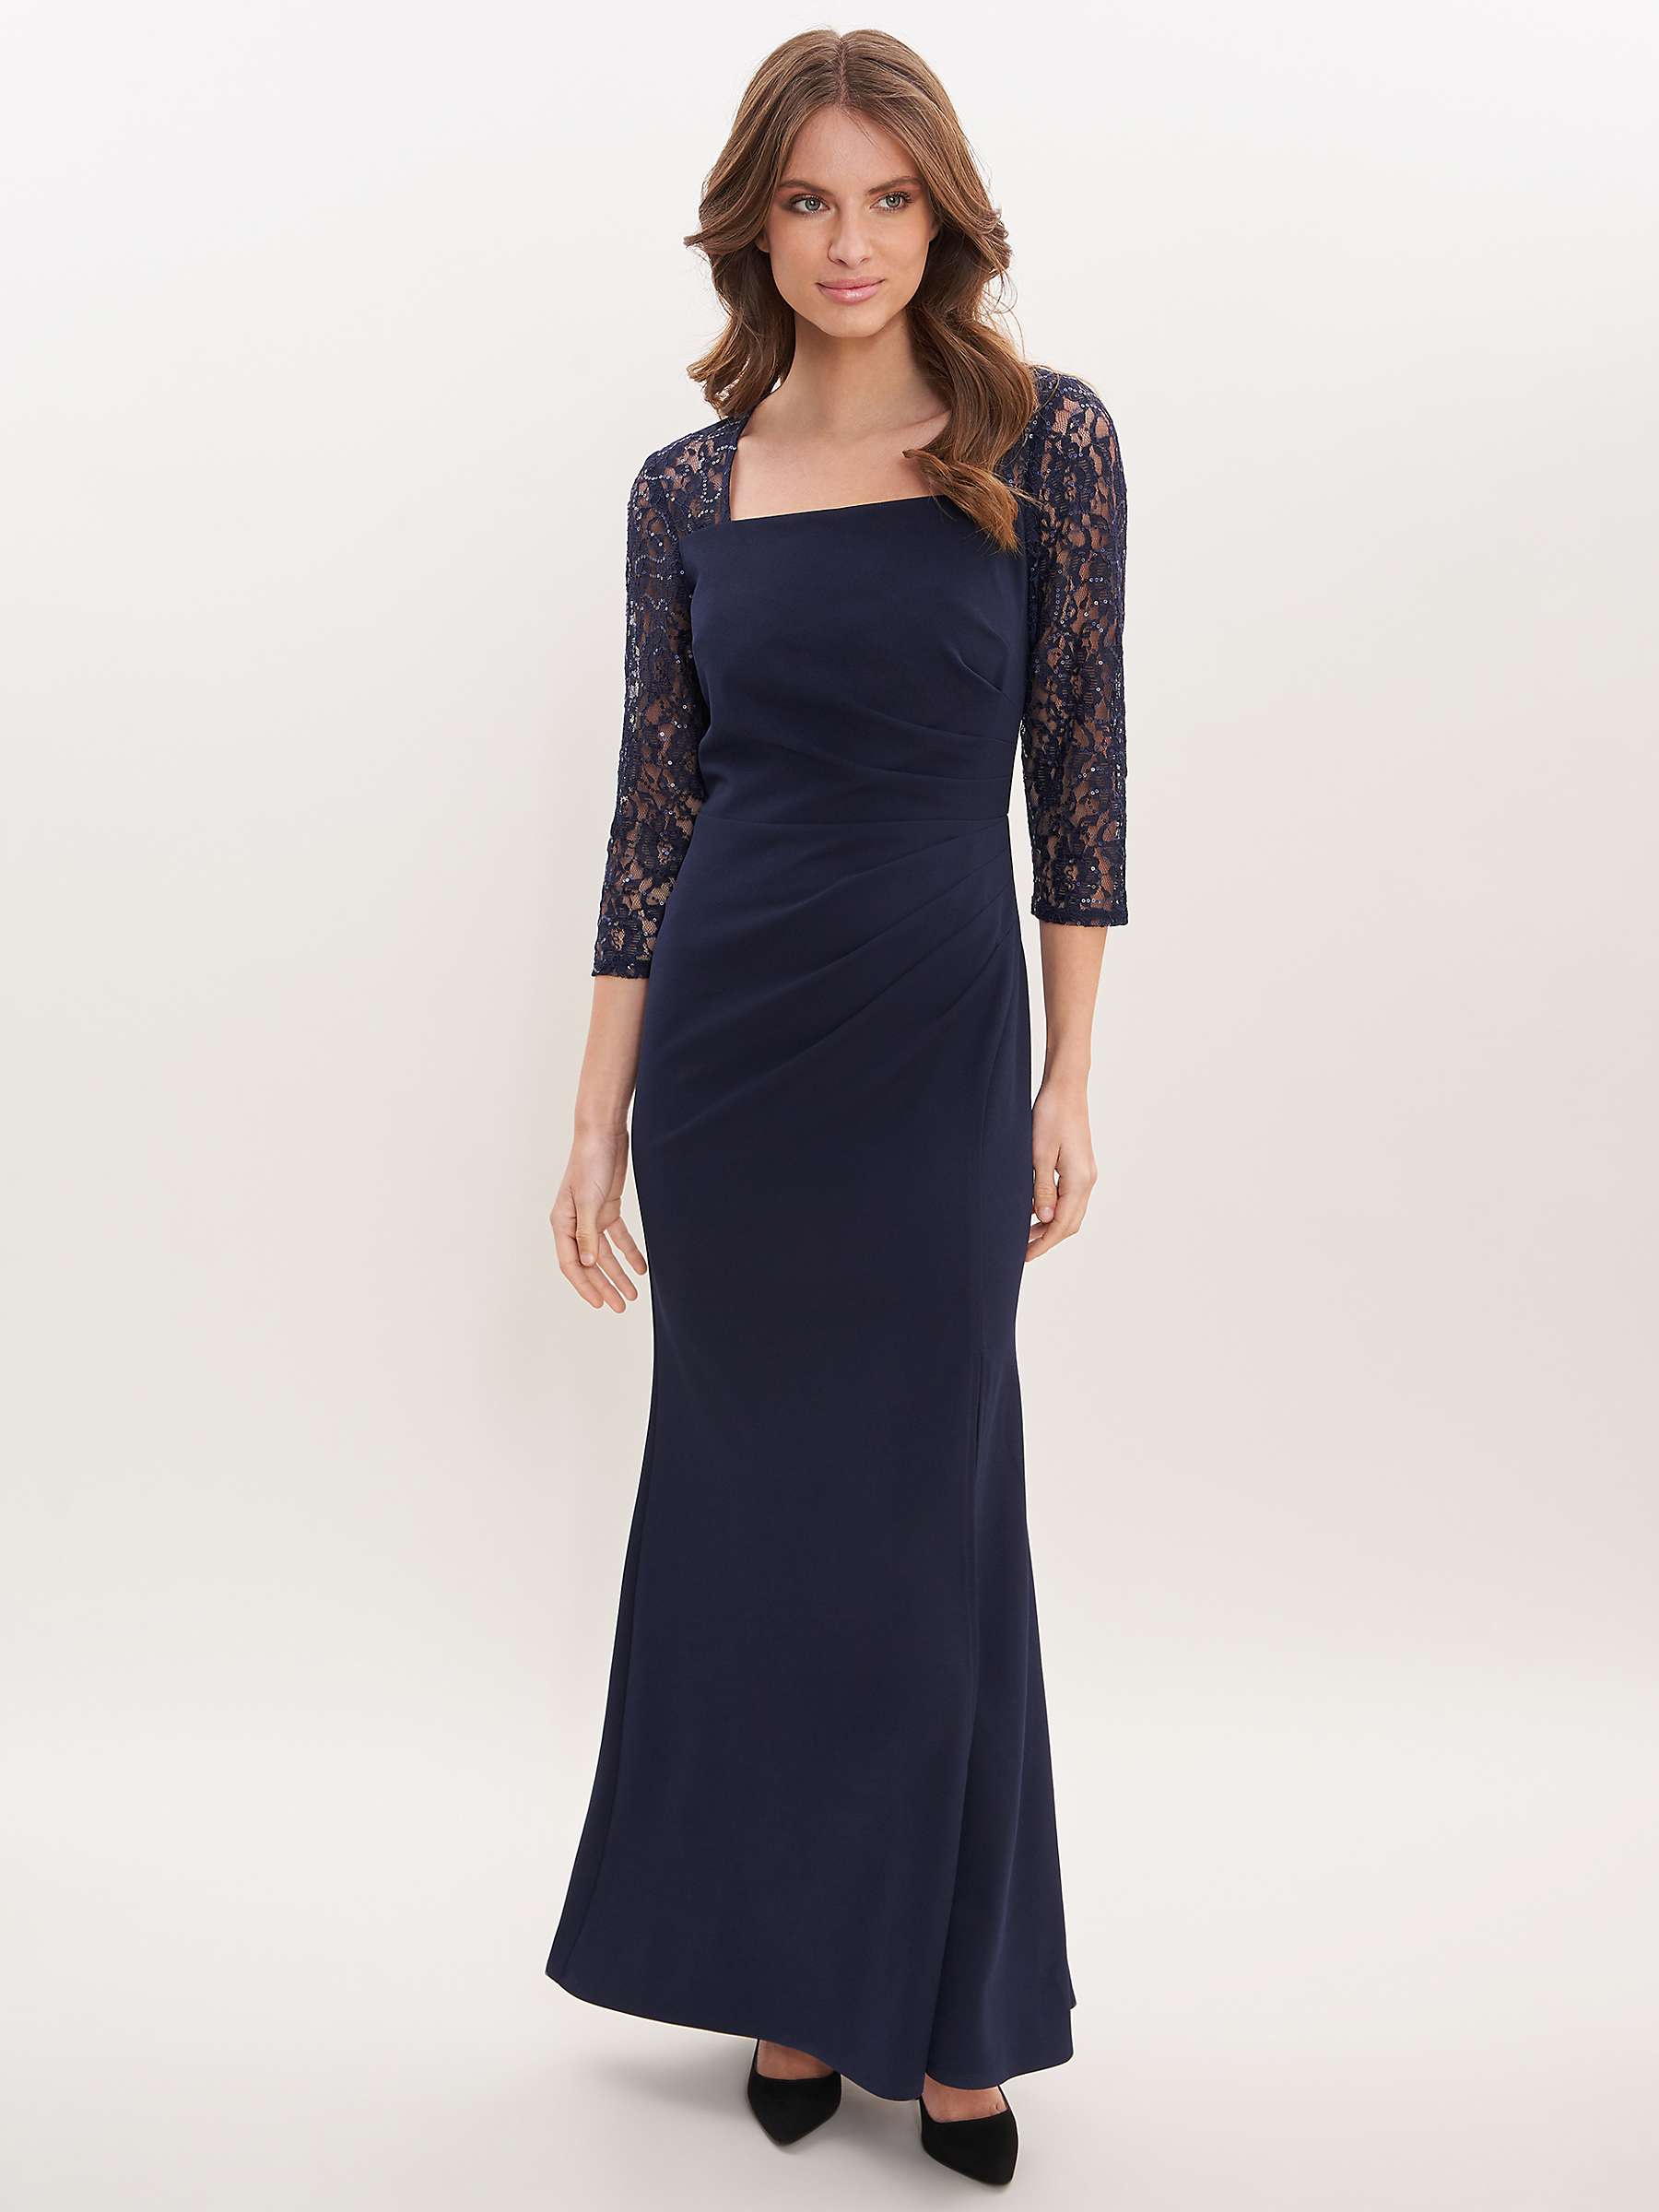 Buy Gina Bacconi Una Lace Detail Maxi Dress, Navy Online at johnlewis.com